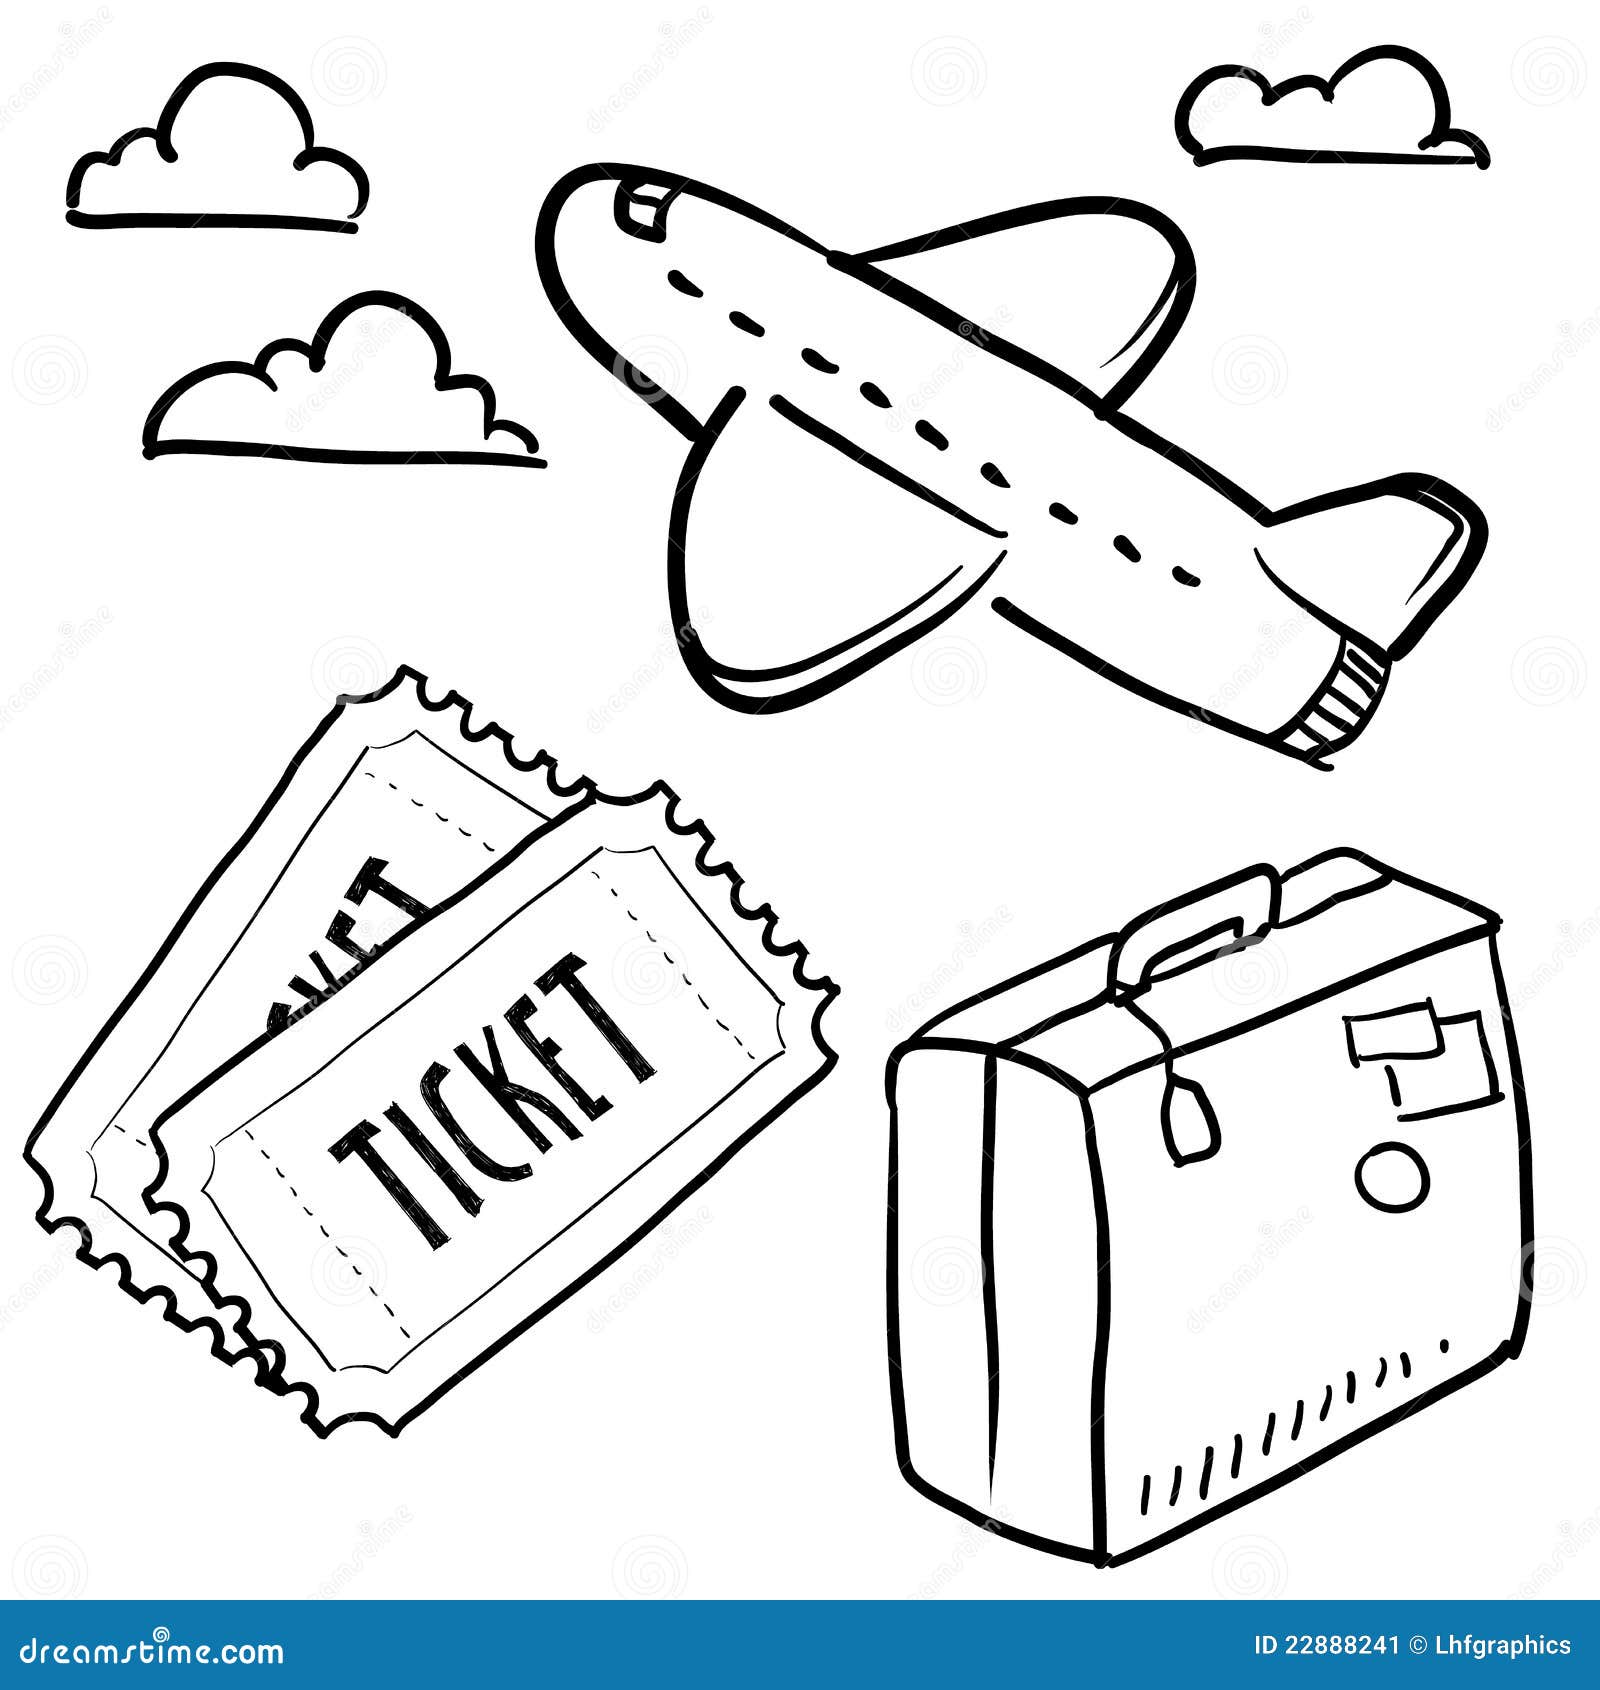 clipart airplane ticket - photo #41